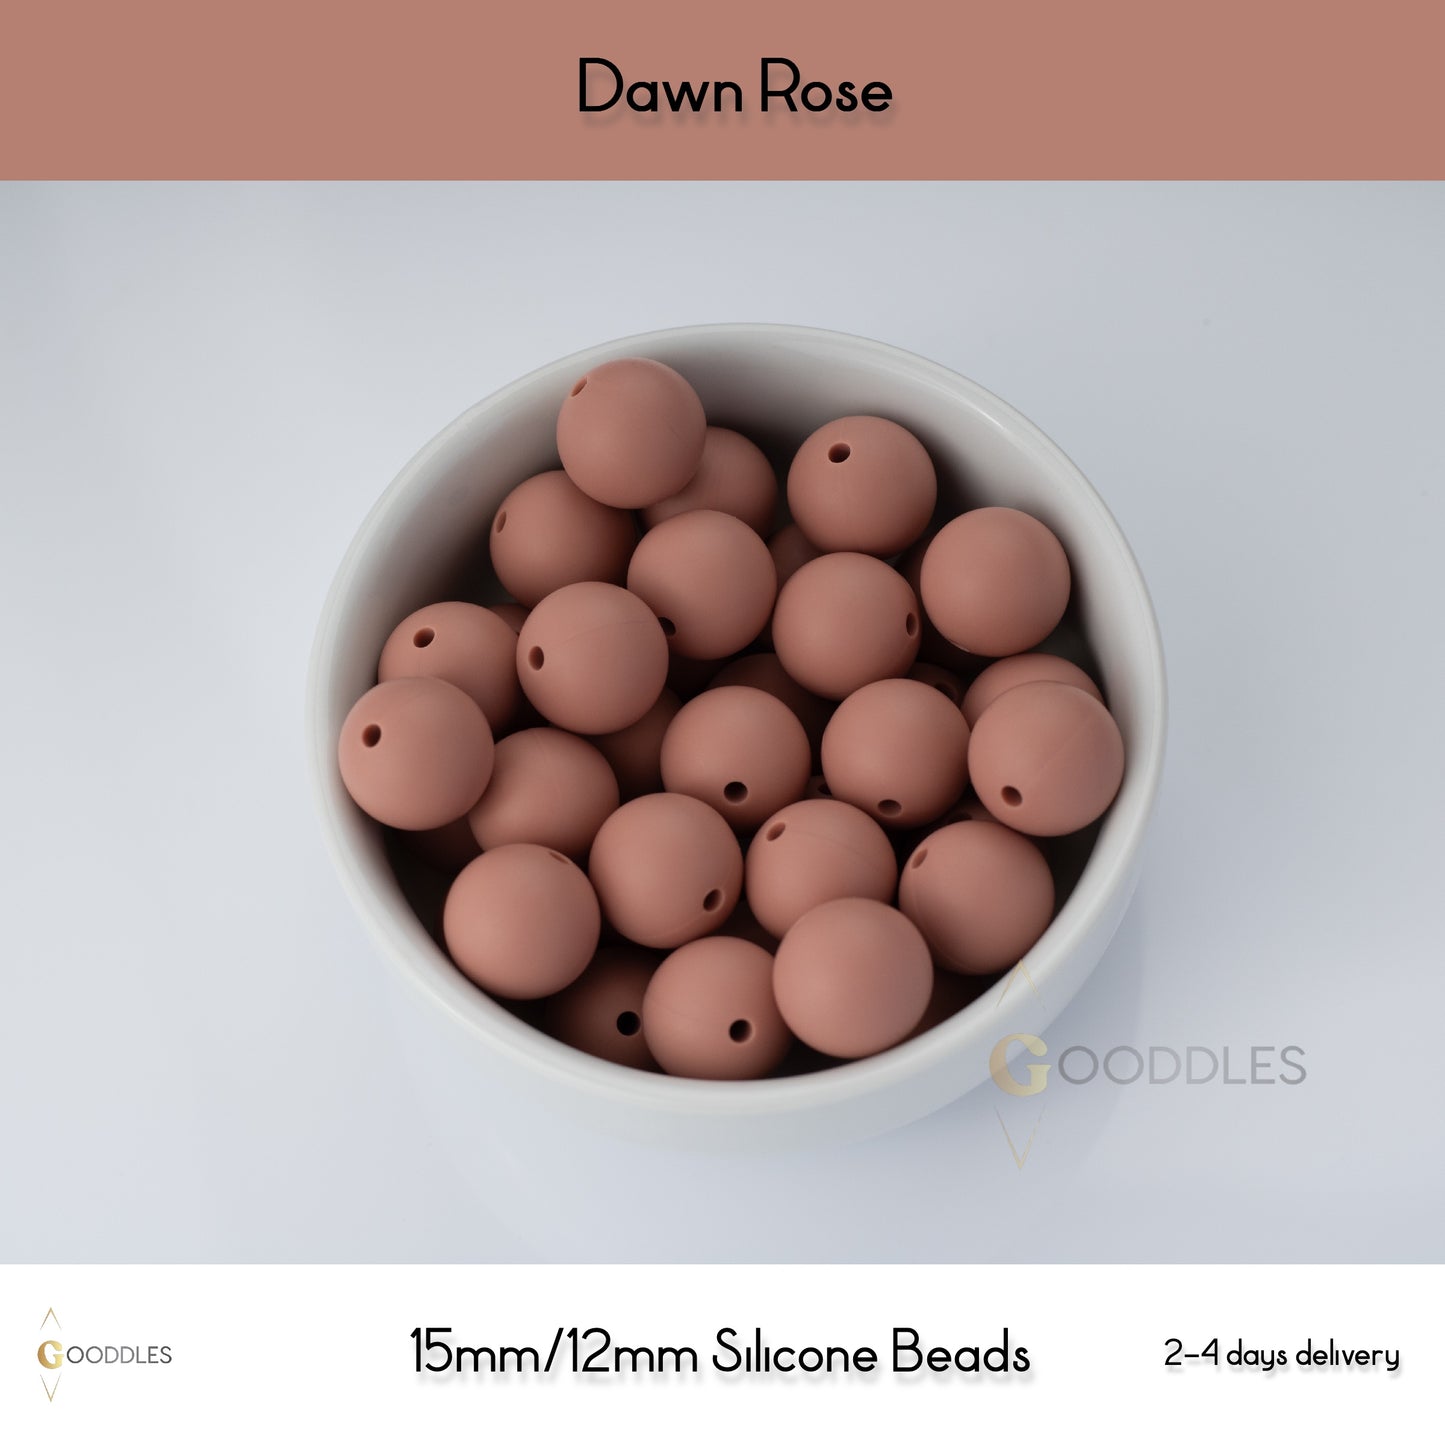 5pcs, Dawn Rose Silicone Beads Round Silicone Beads